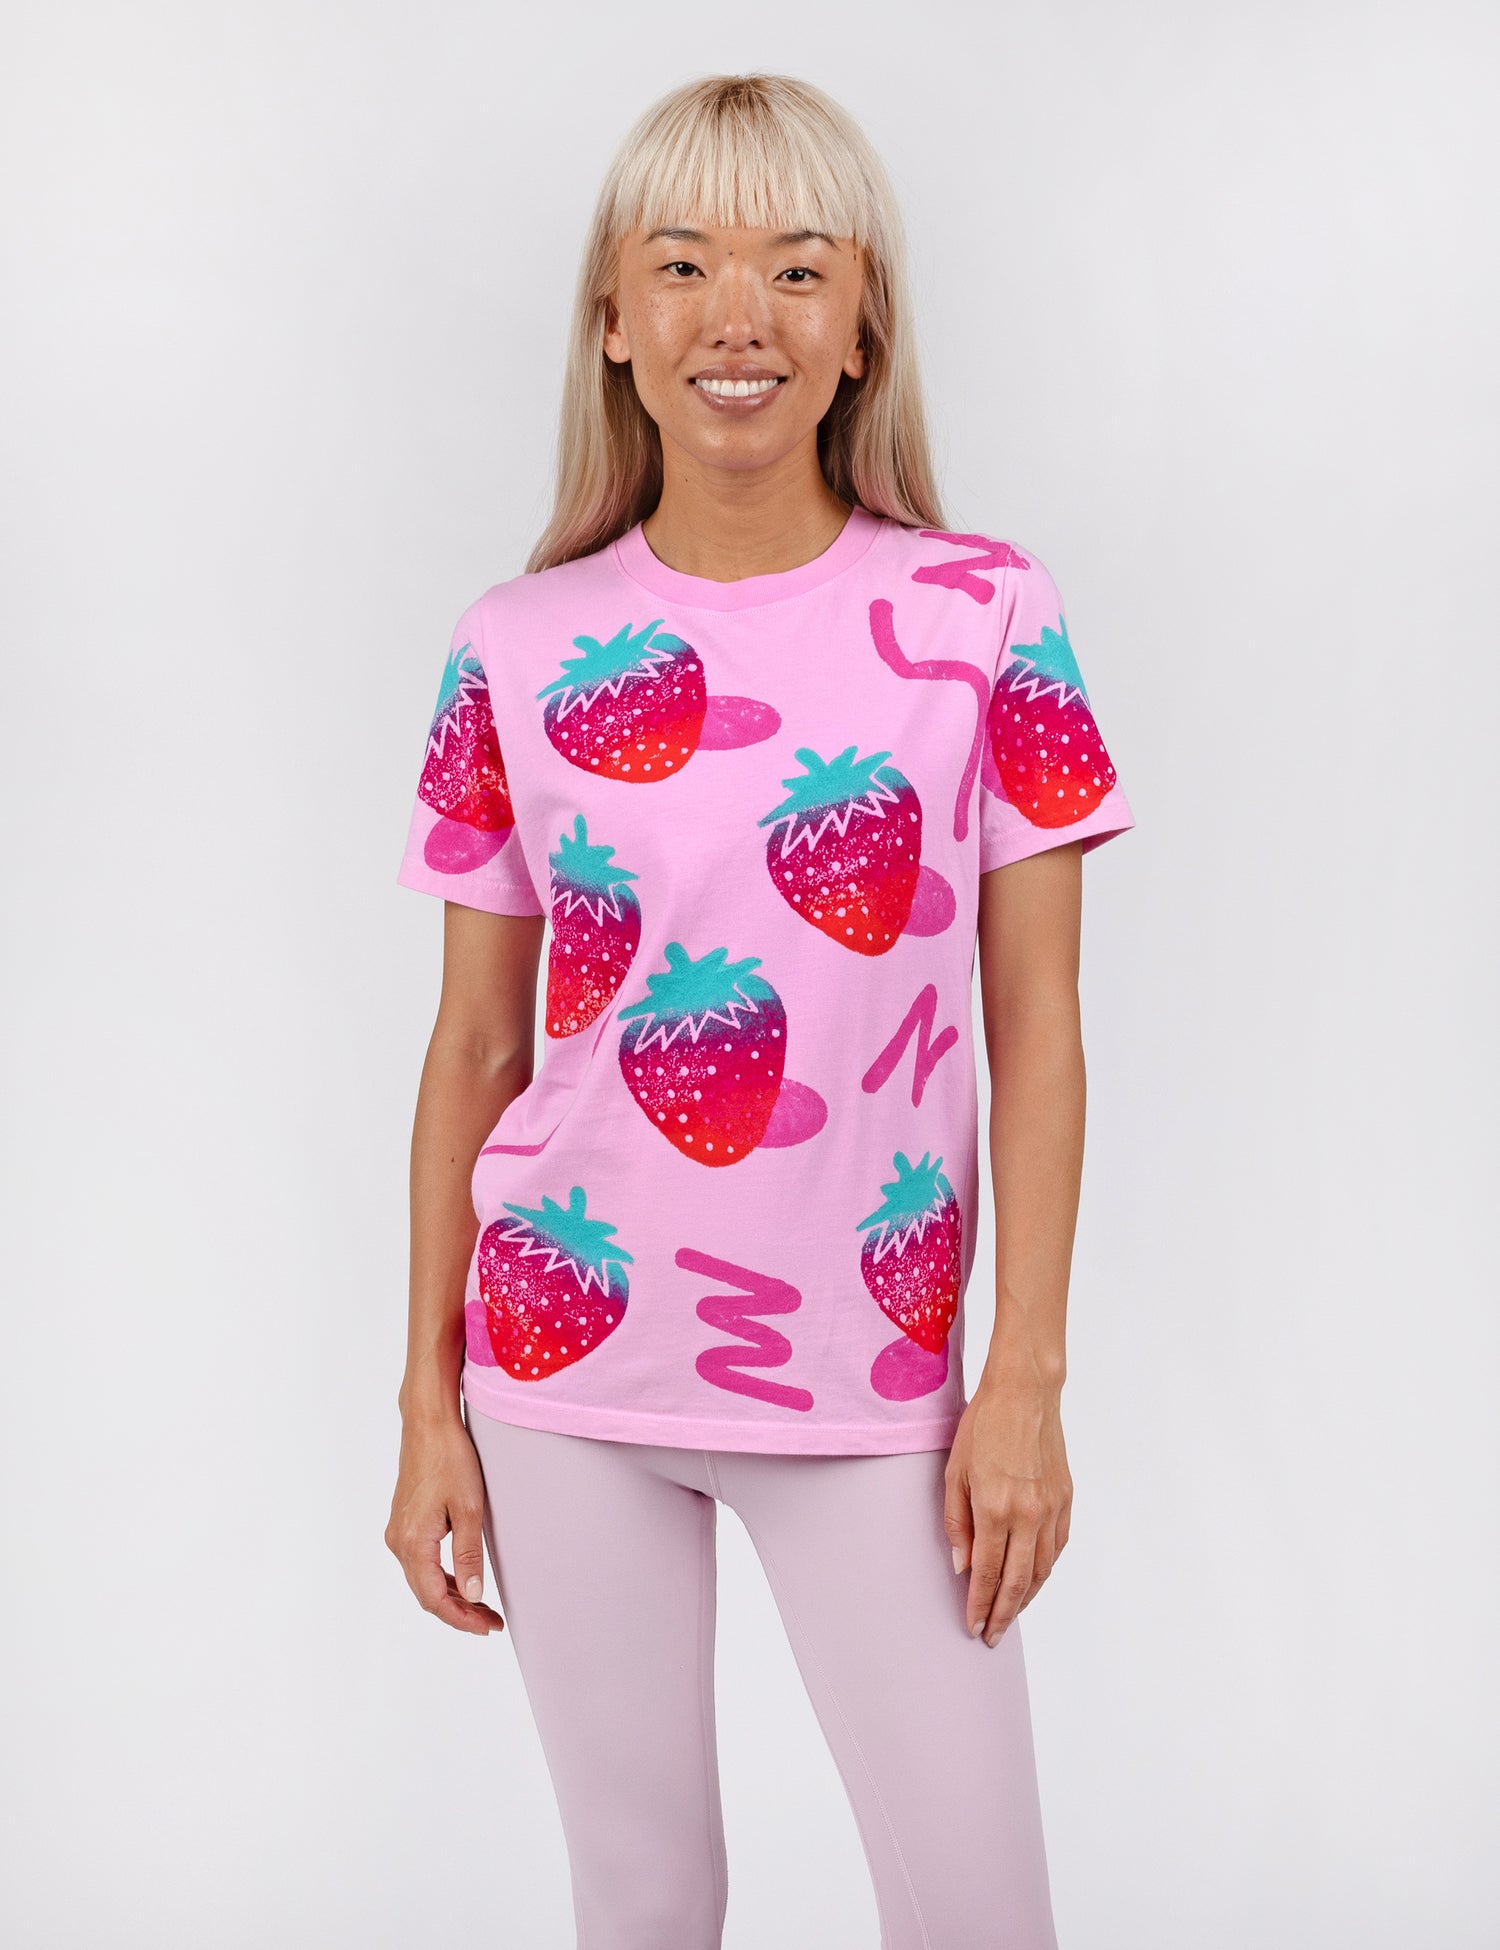 woman wearing a pink shirt with strawberry stamp print all over